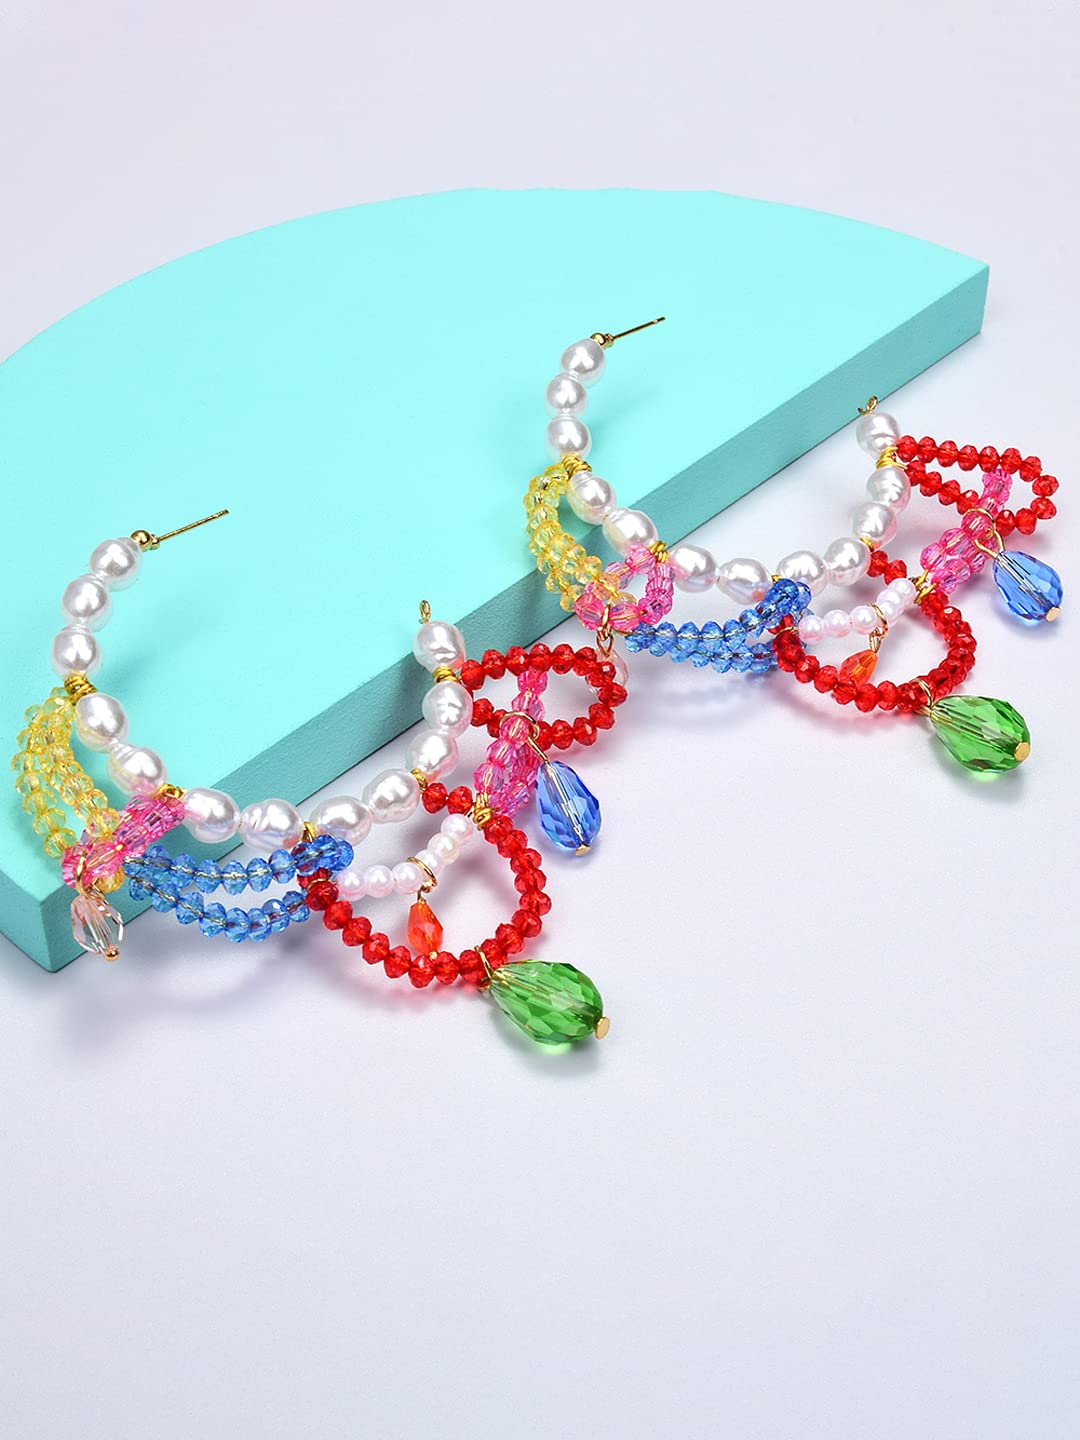 Yellow Chimes Earrings For Women Multicolor Beads Hanging Round Hoop Earrings For Women and Girls